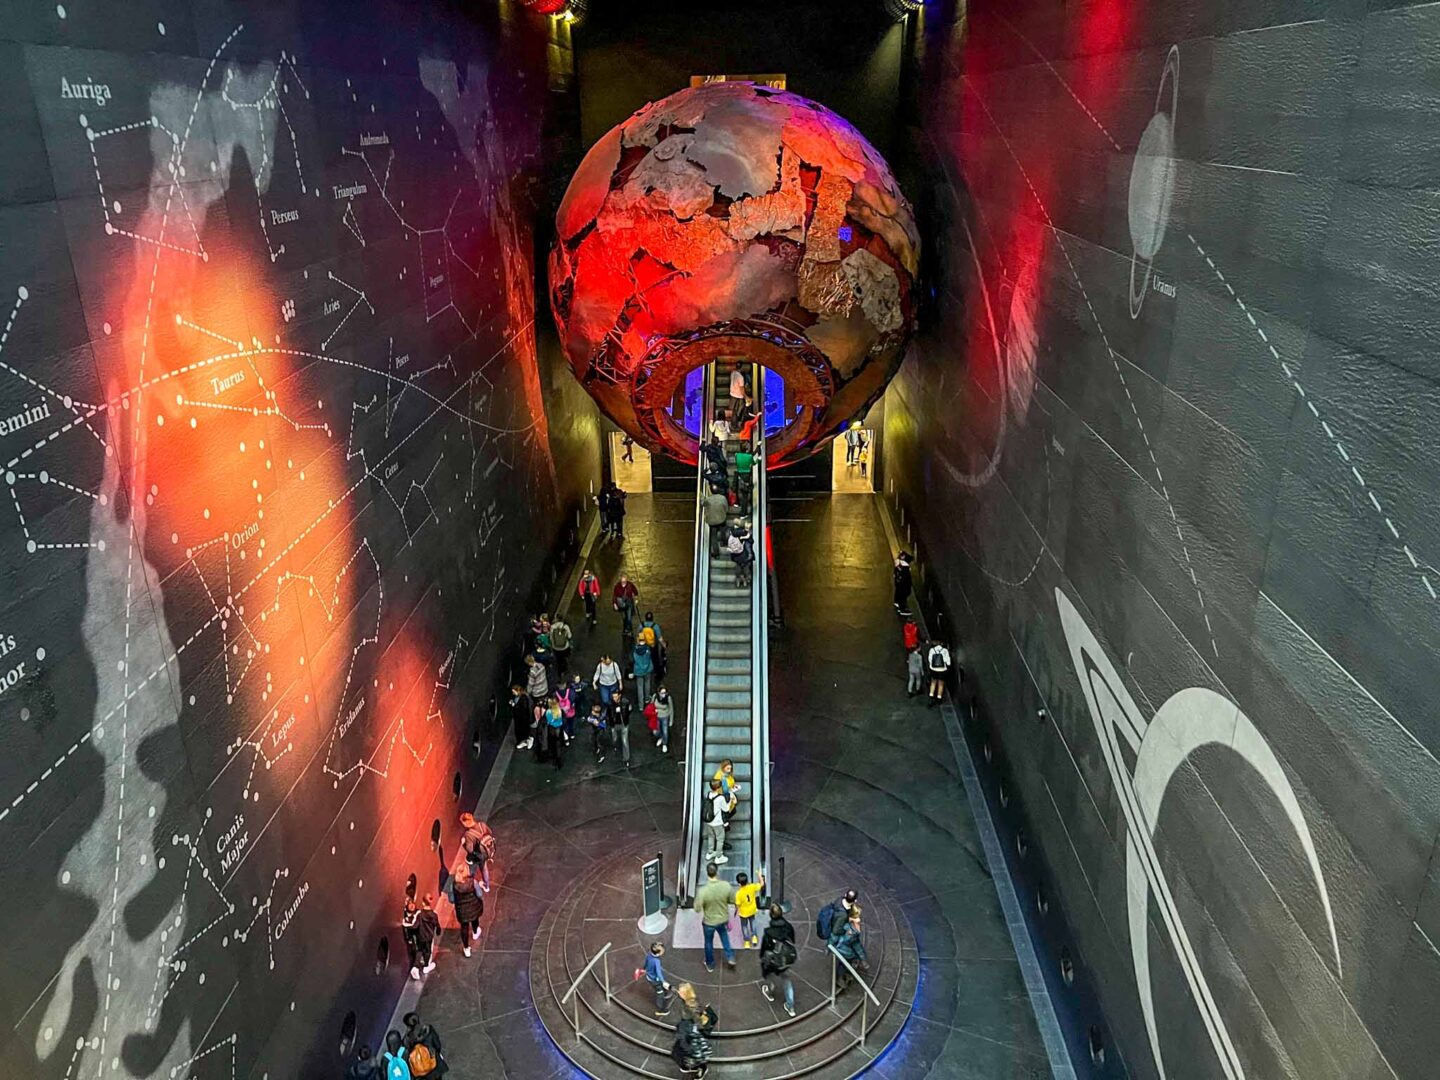 Natural history museum escalator, London with kids, London with kids itinerary,